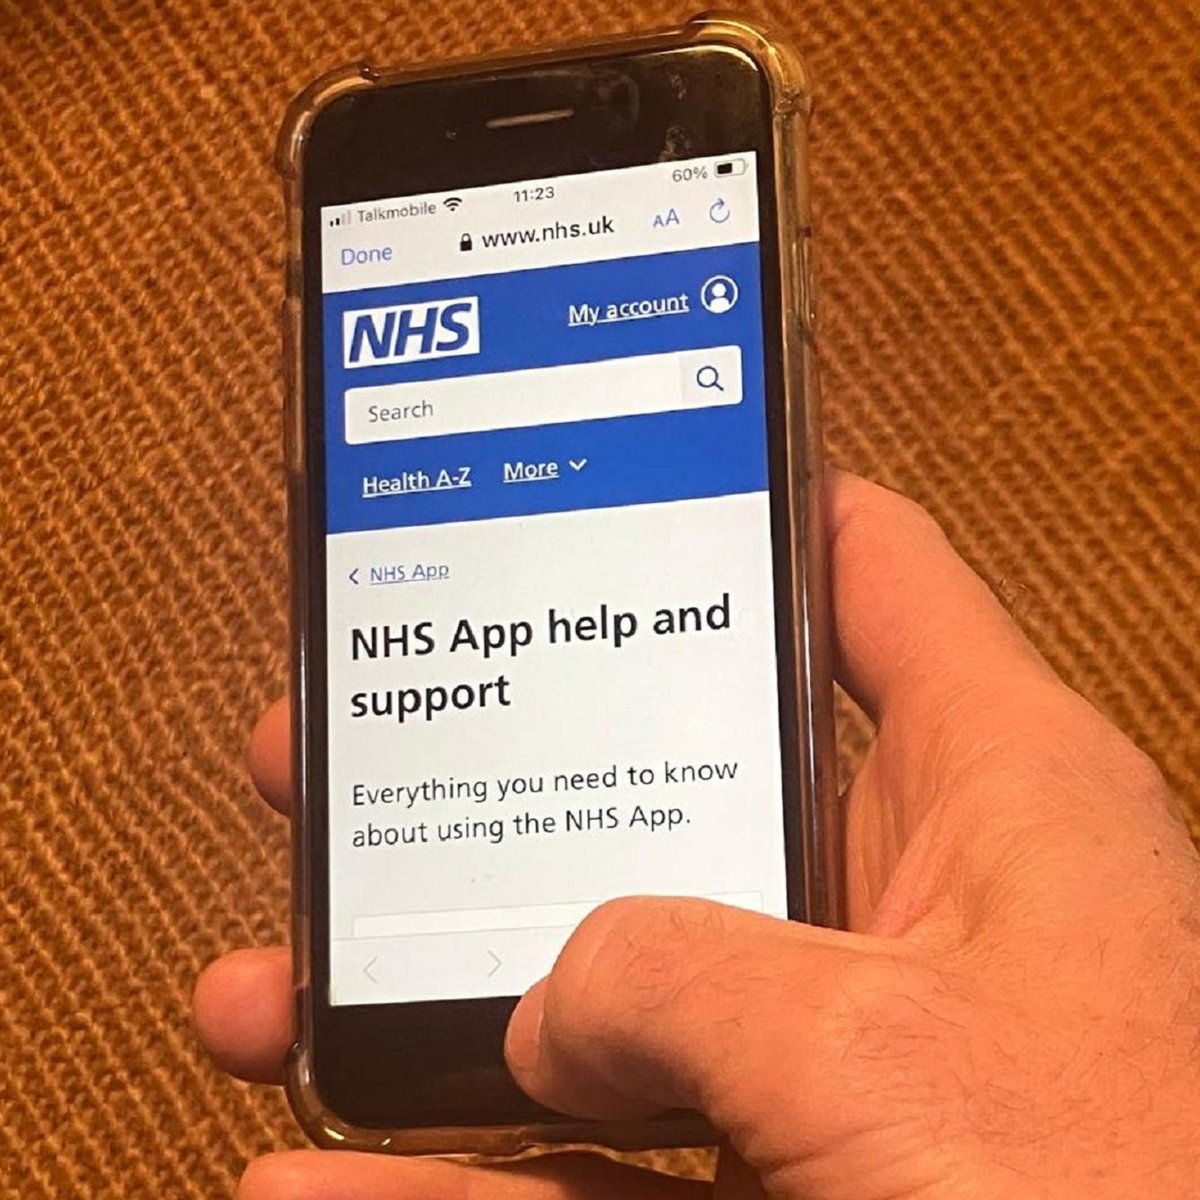 'Digital prescriptions allow patients to take more ownership of their health care.' They also bring efficiencies and savings for health centres, GPs and #pharmacists. Find out how the UK introduced full digital prescribing: bit.ly/3UrmDhX @NHSEngland